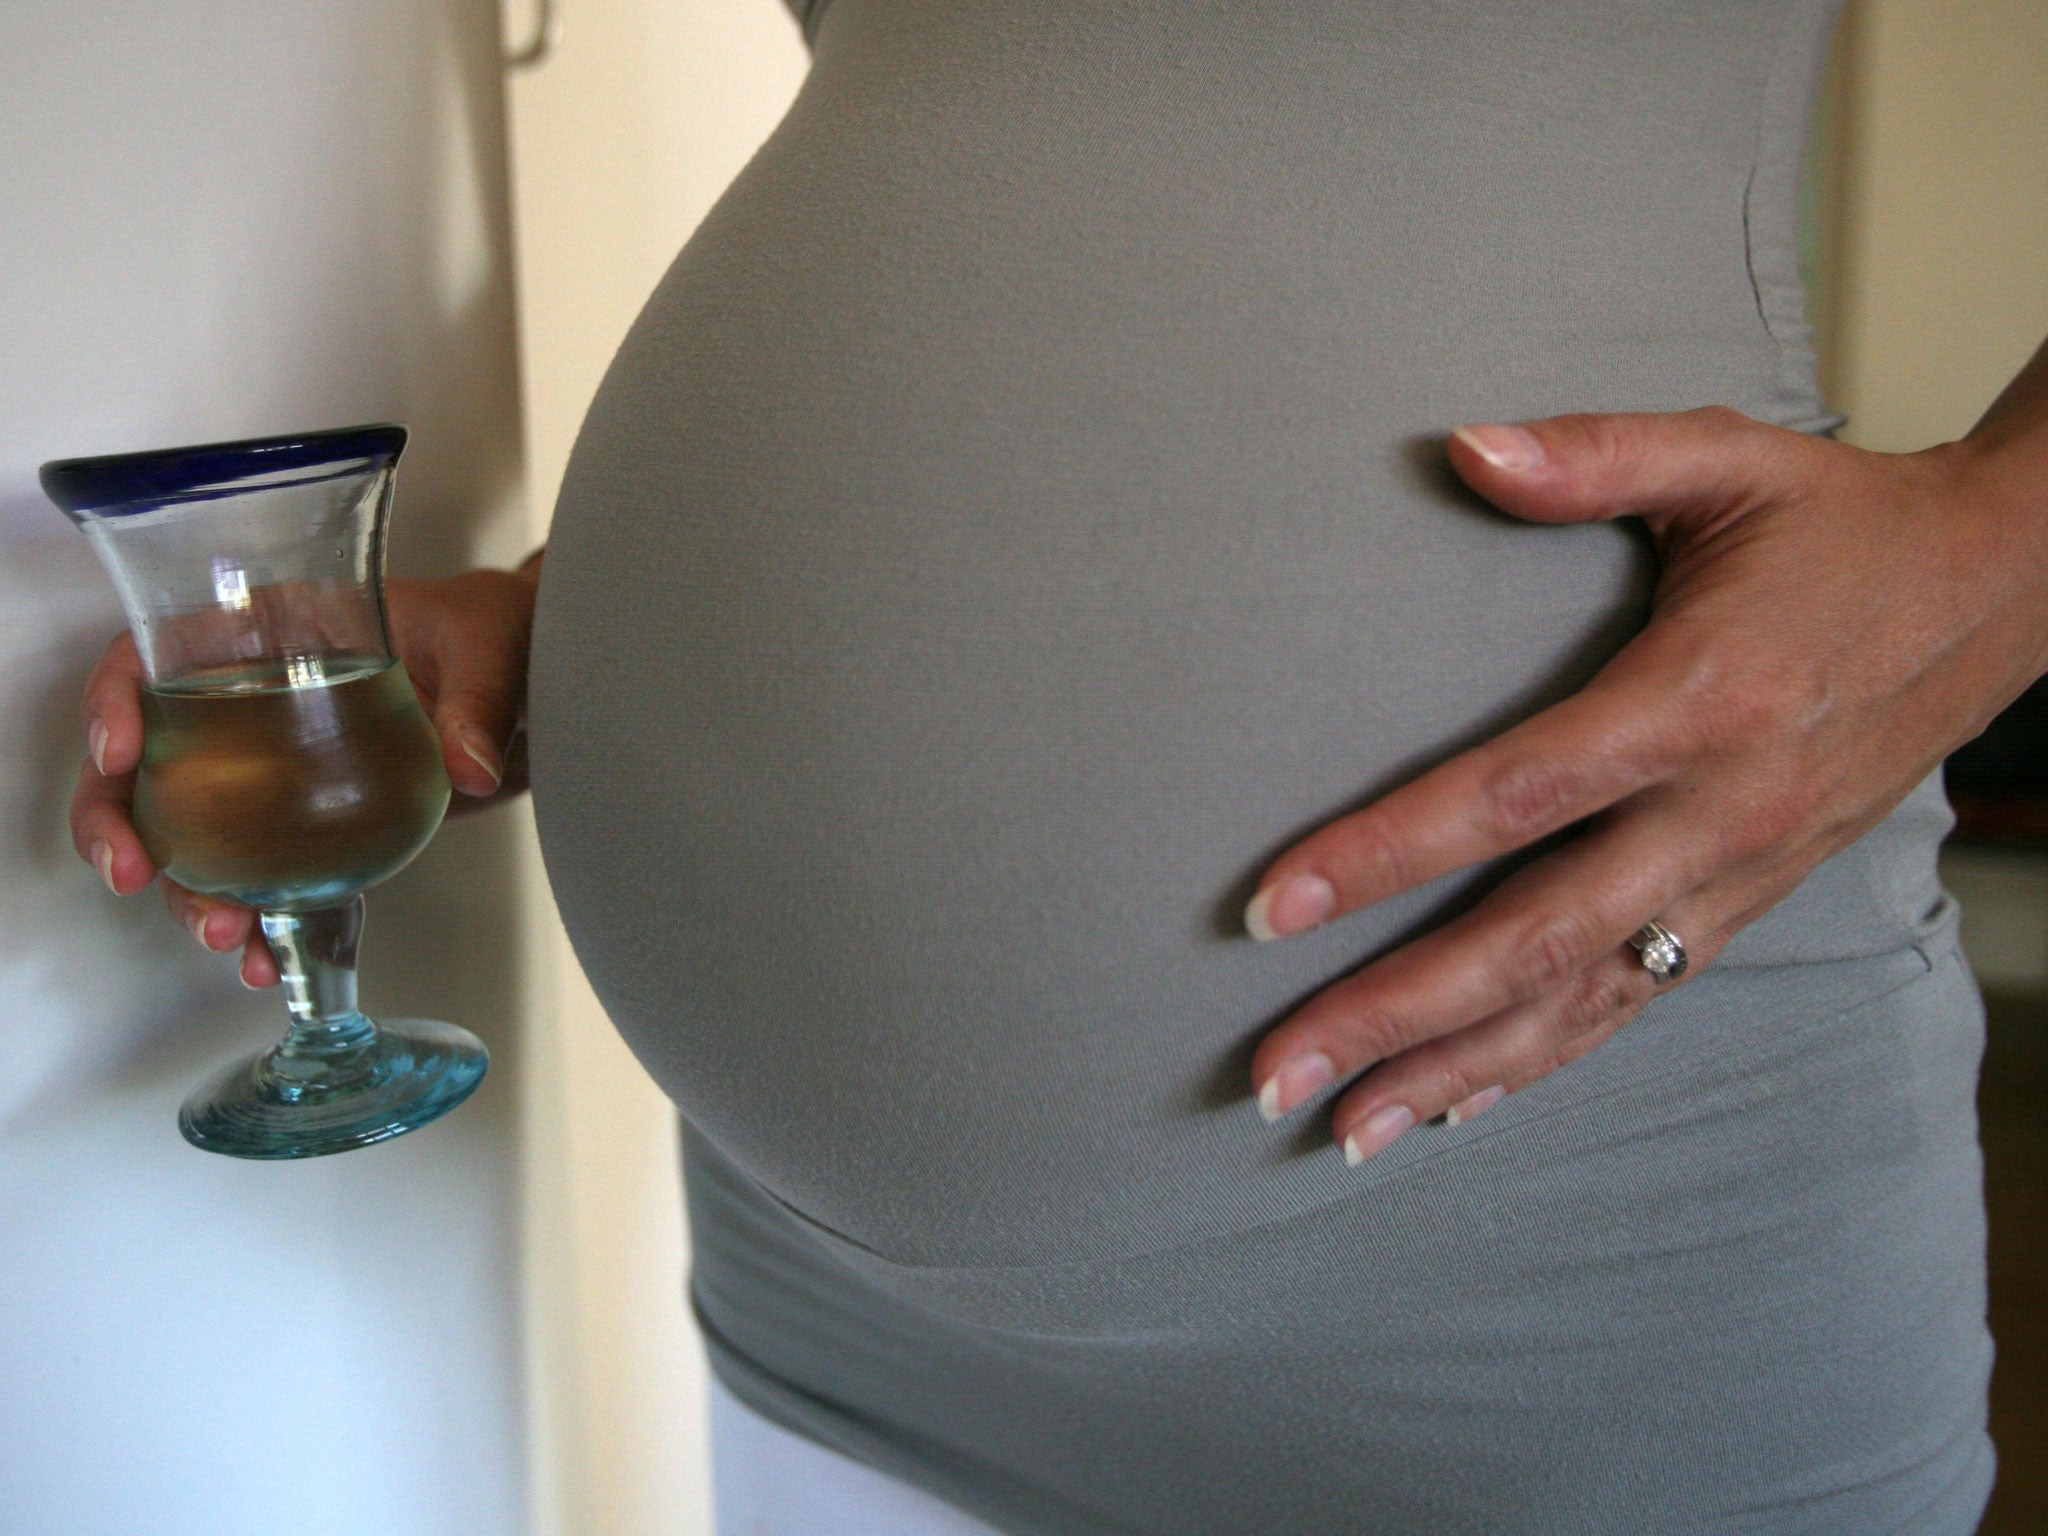 Some 53% of women drank more than two units a week during the first trimester, study finds